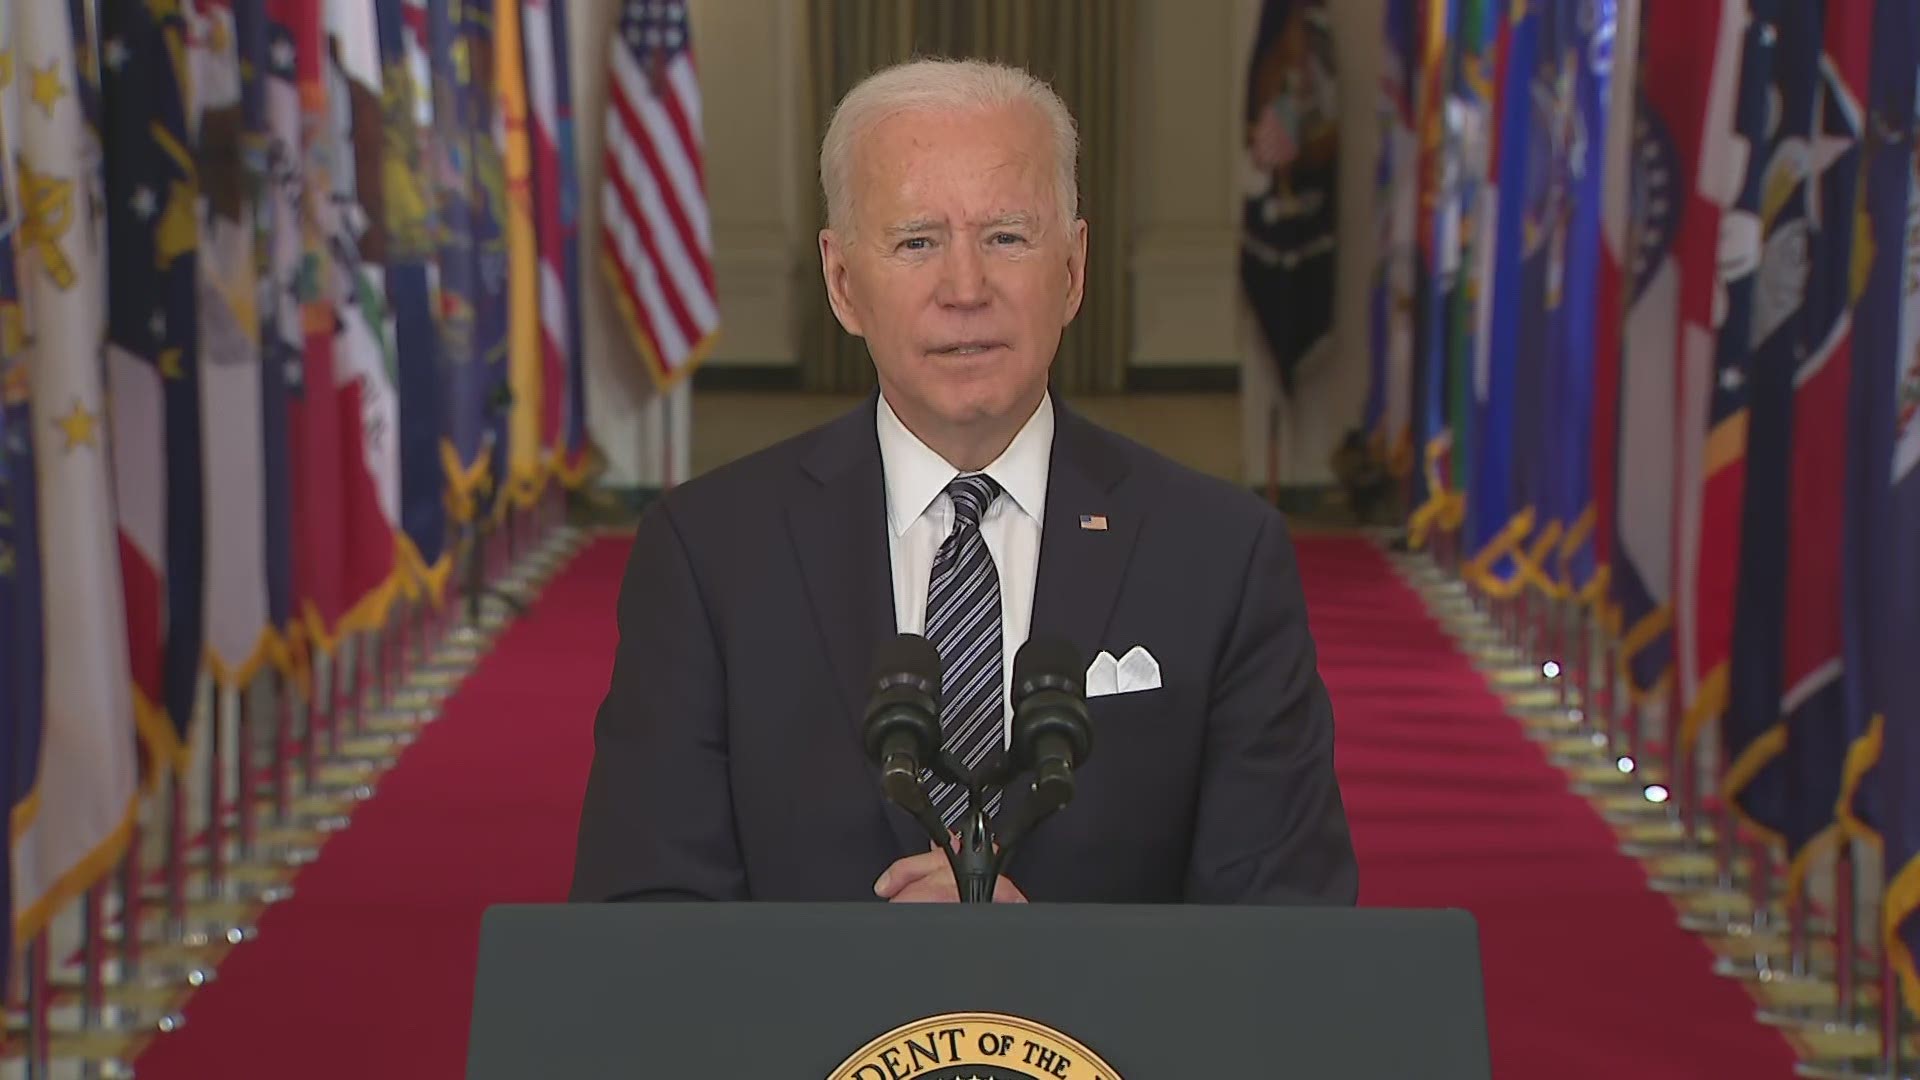 President Joe Biden touted how the American Rescue Plan will provide direct payments to most families.